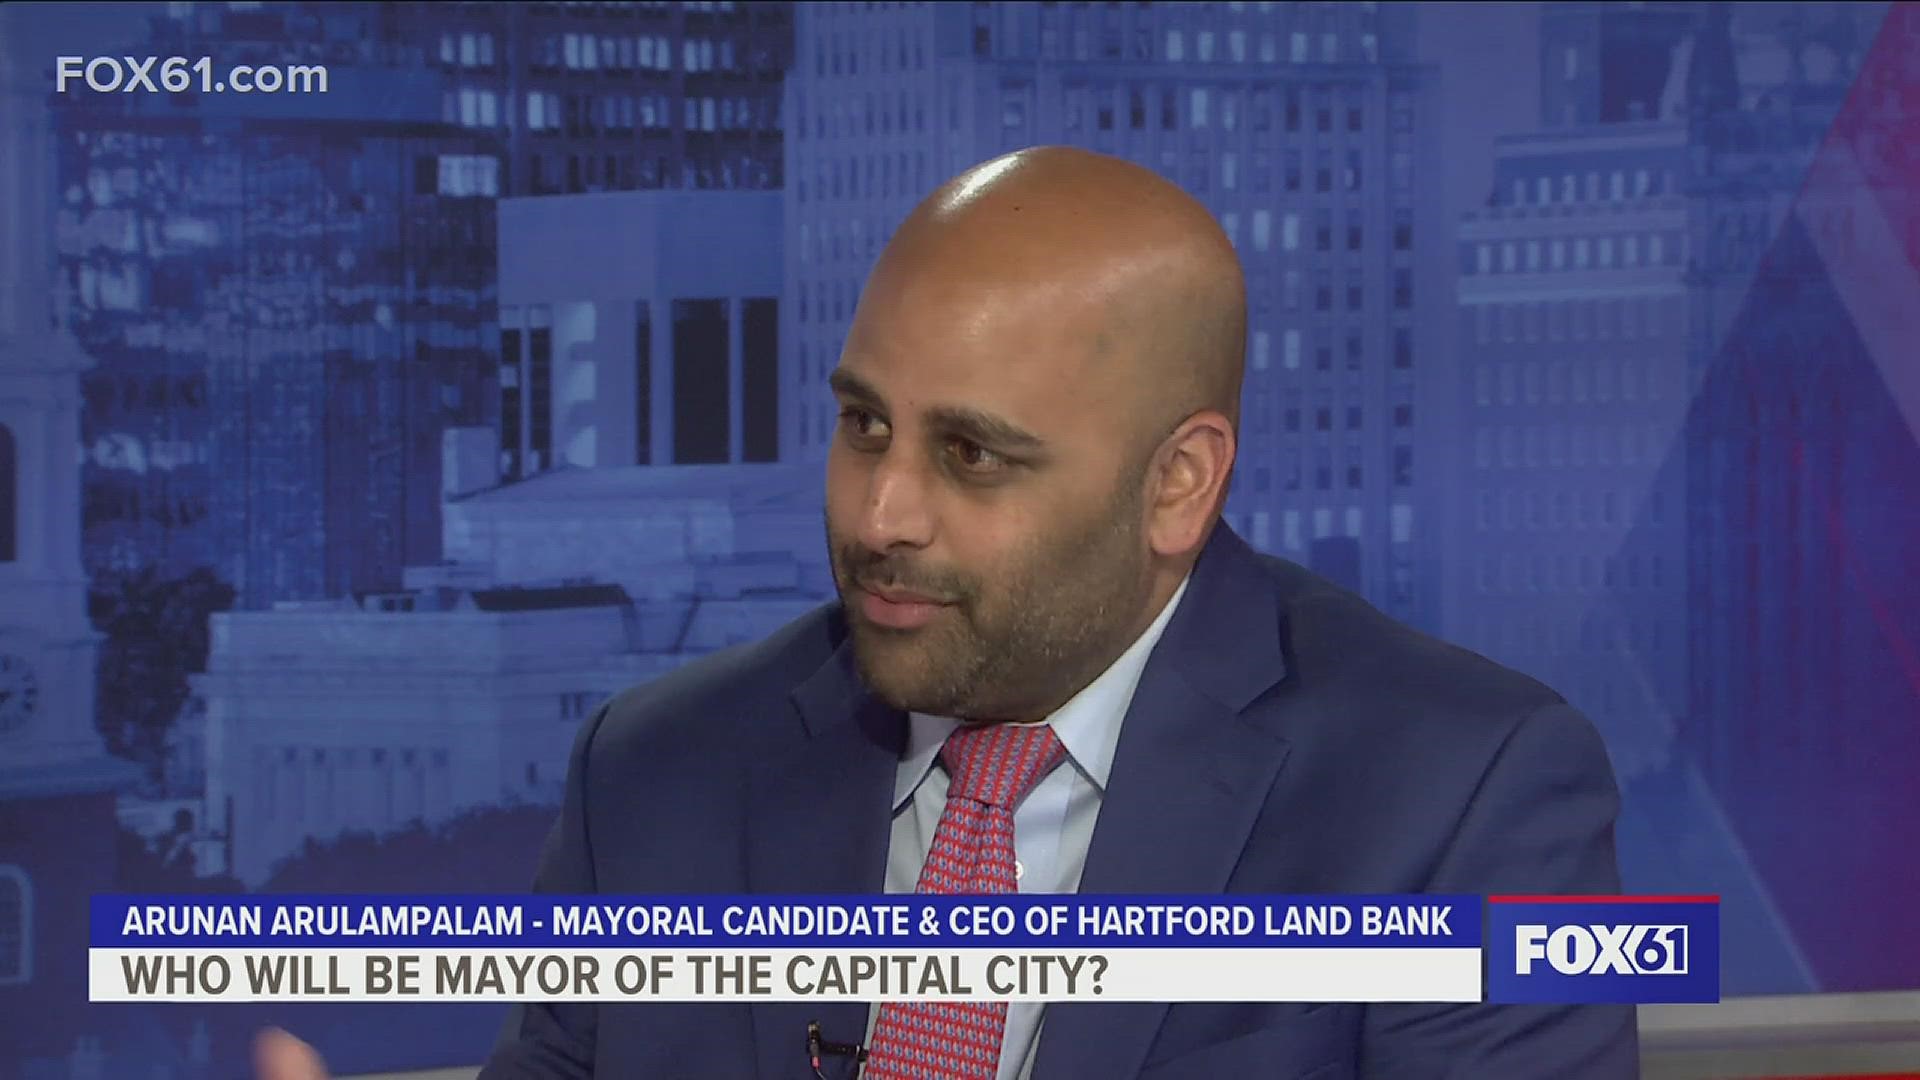 We sit down with one of the candidates for mayor of Hartford